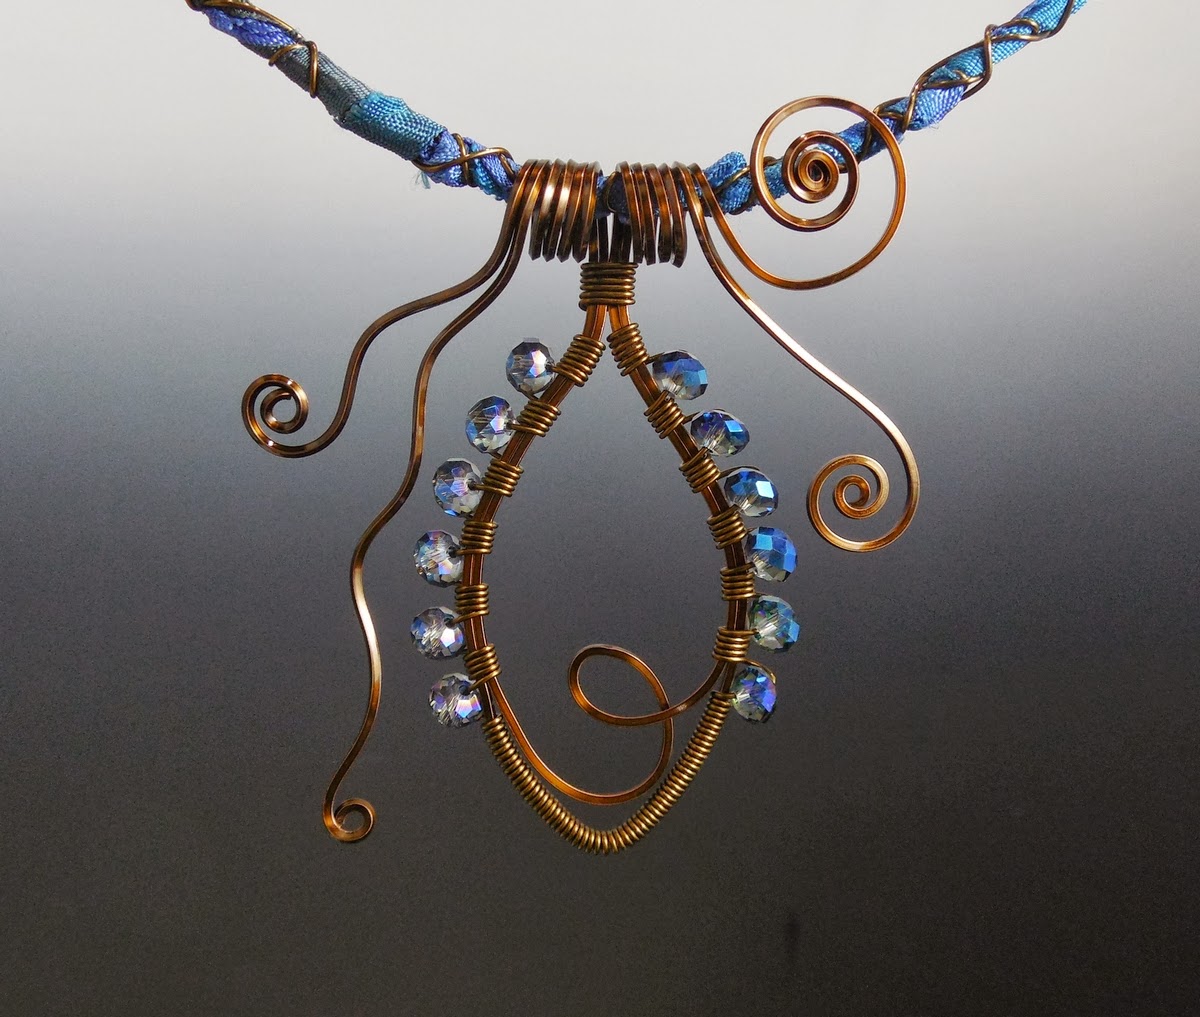 Dawn Blair's Jewelry and Eclectica Blog: More Easy Beads with Wire!